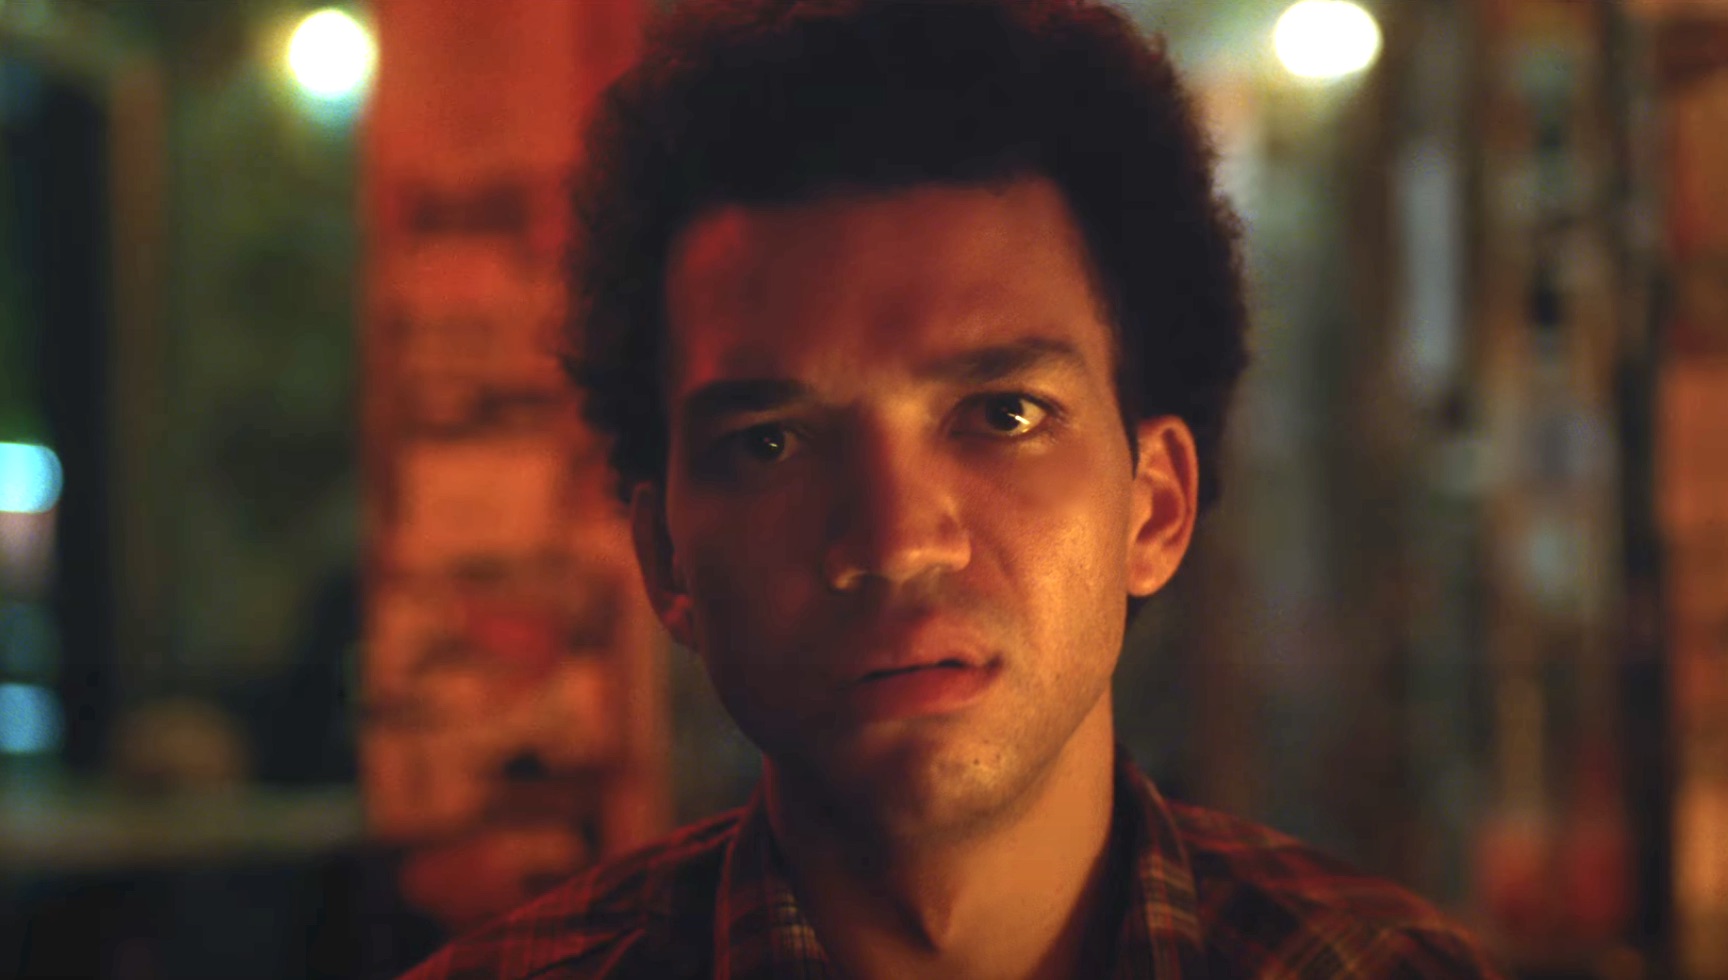 Movie Trailer: ‘I Saw The TV Glow’ [Starring Justice Smith]